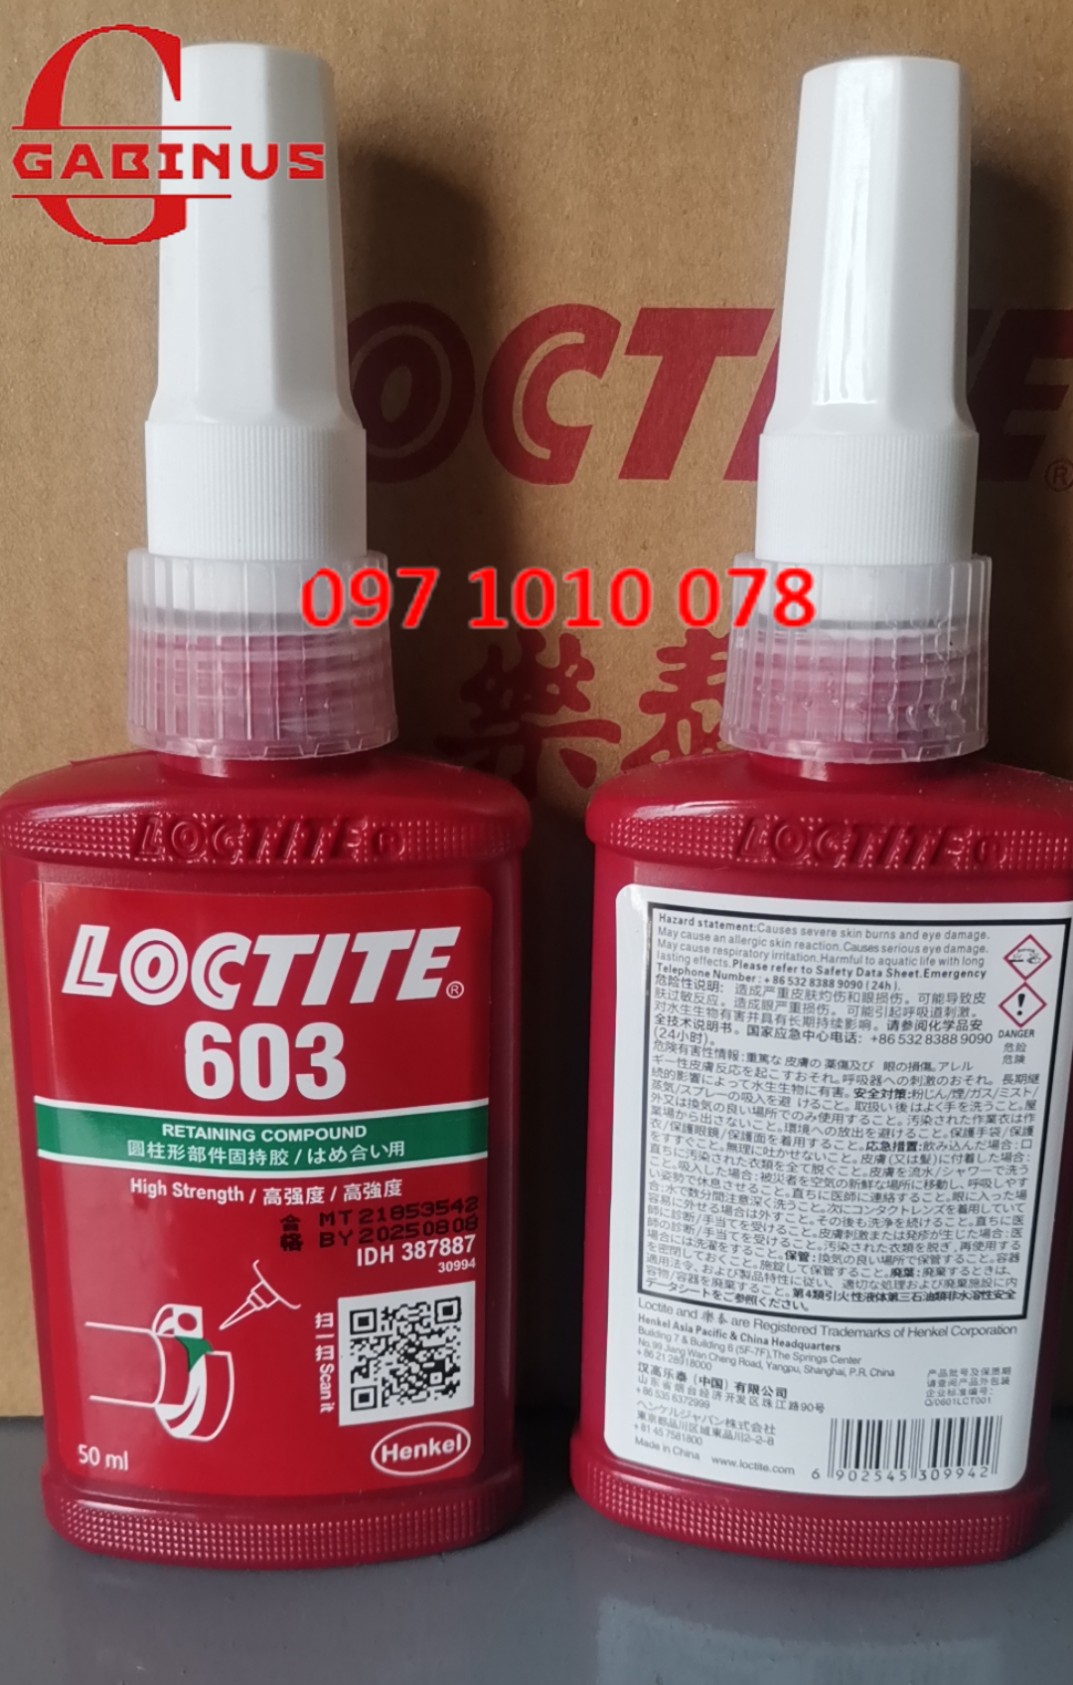 LOCTITE 603 / KEO CHỐNG XOAY